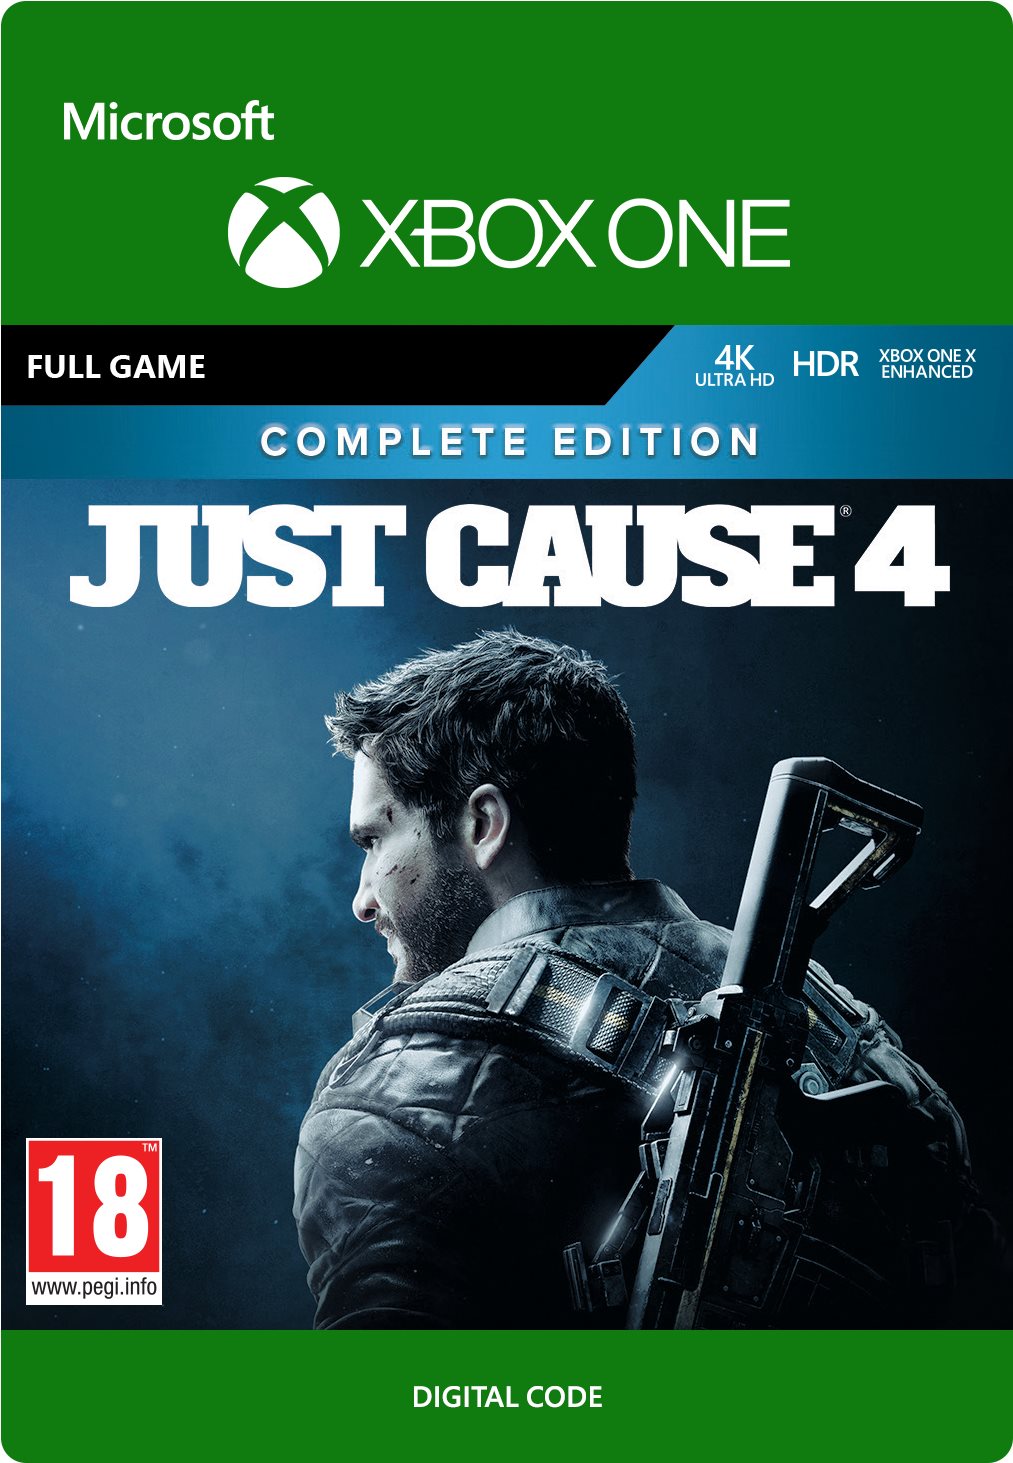 Just Cause 4 Complete Edition - Xbox DIGITAL